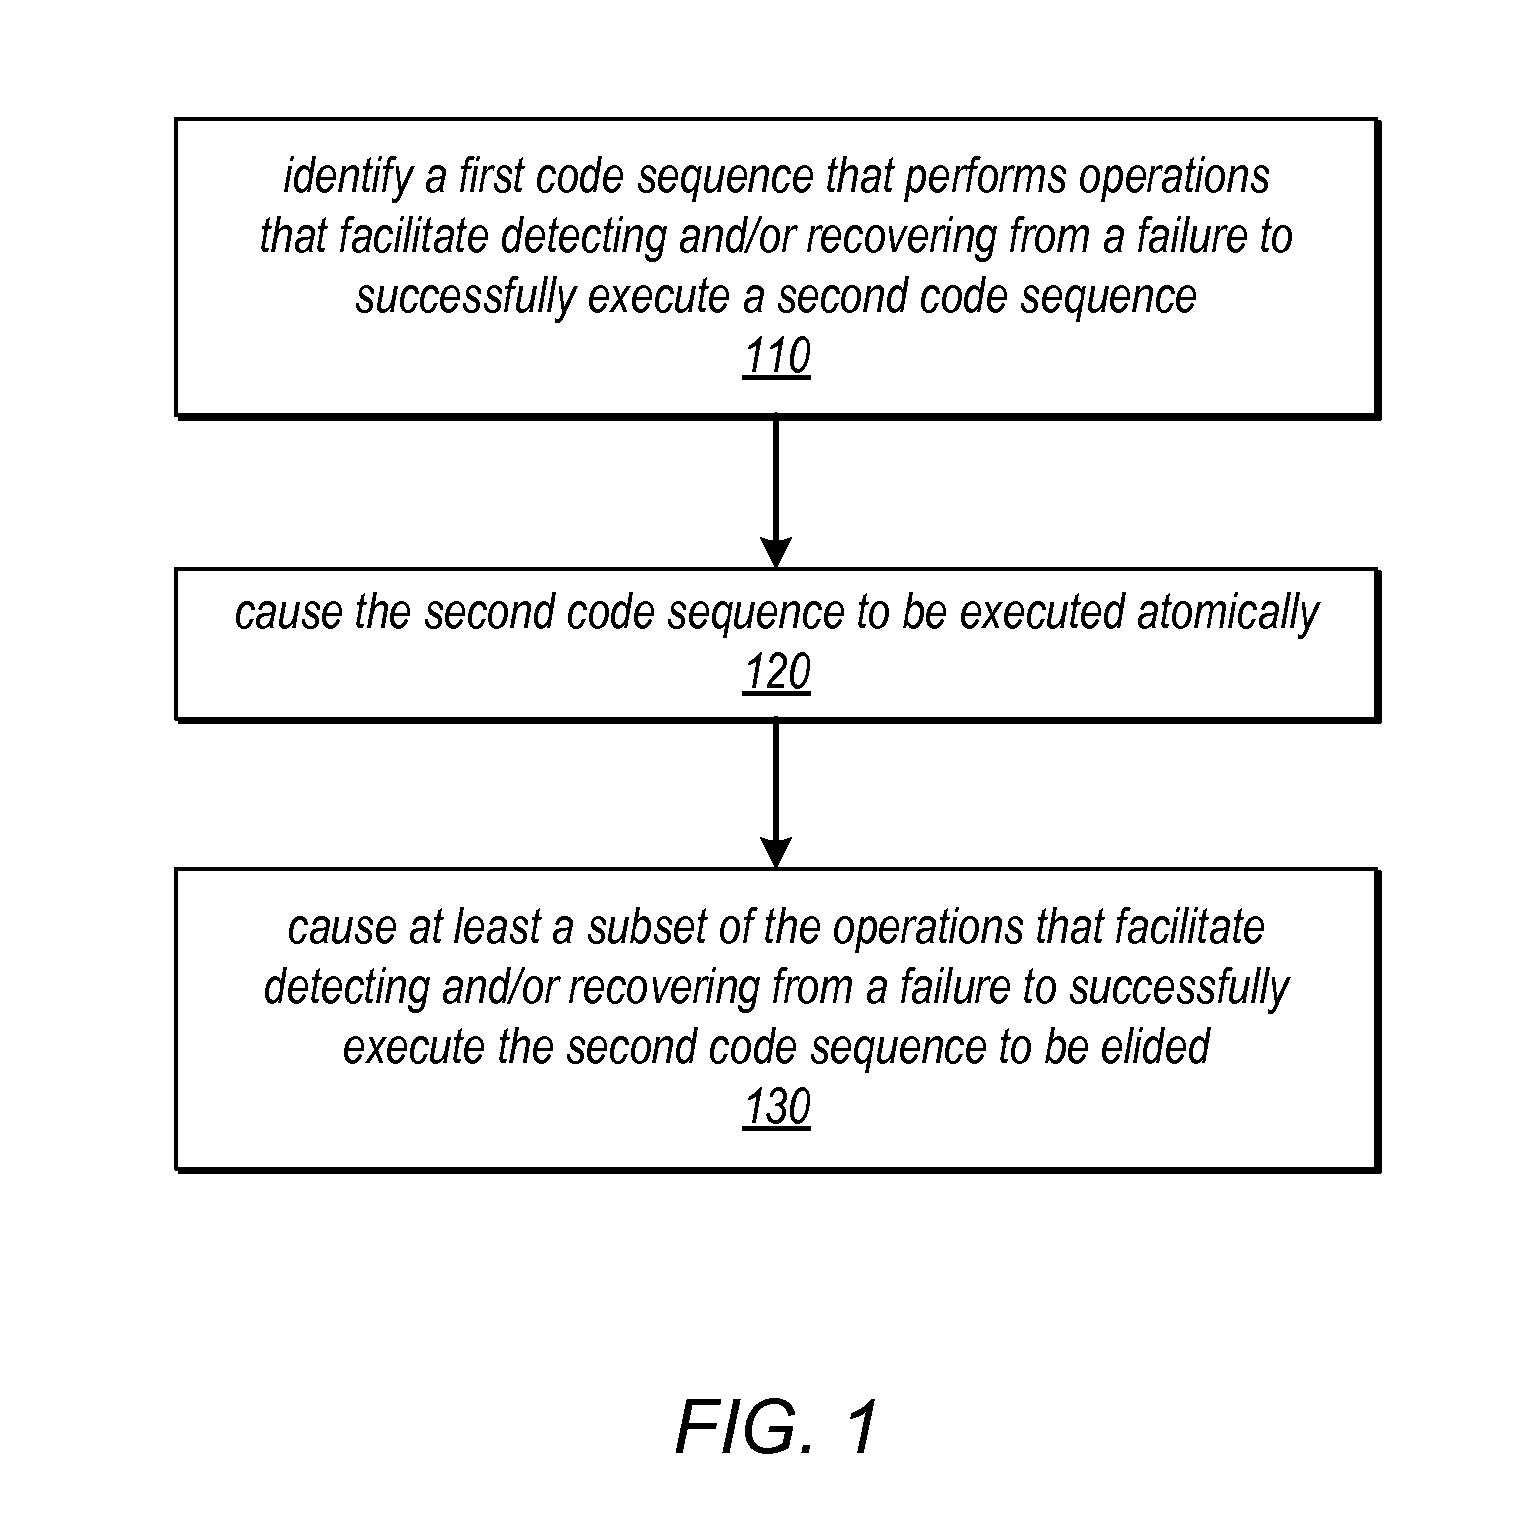 System and Method for Optimizing a Code Section by Forcing a Code Section to be Executed Atomically